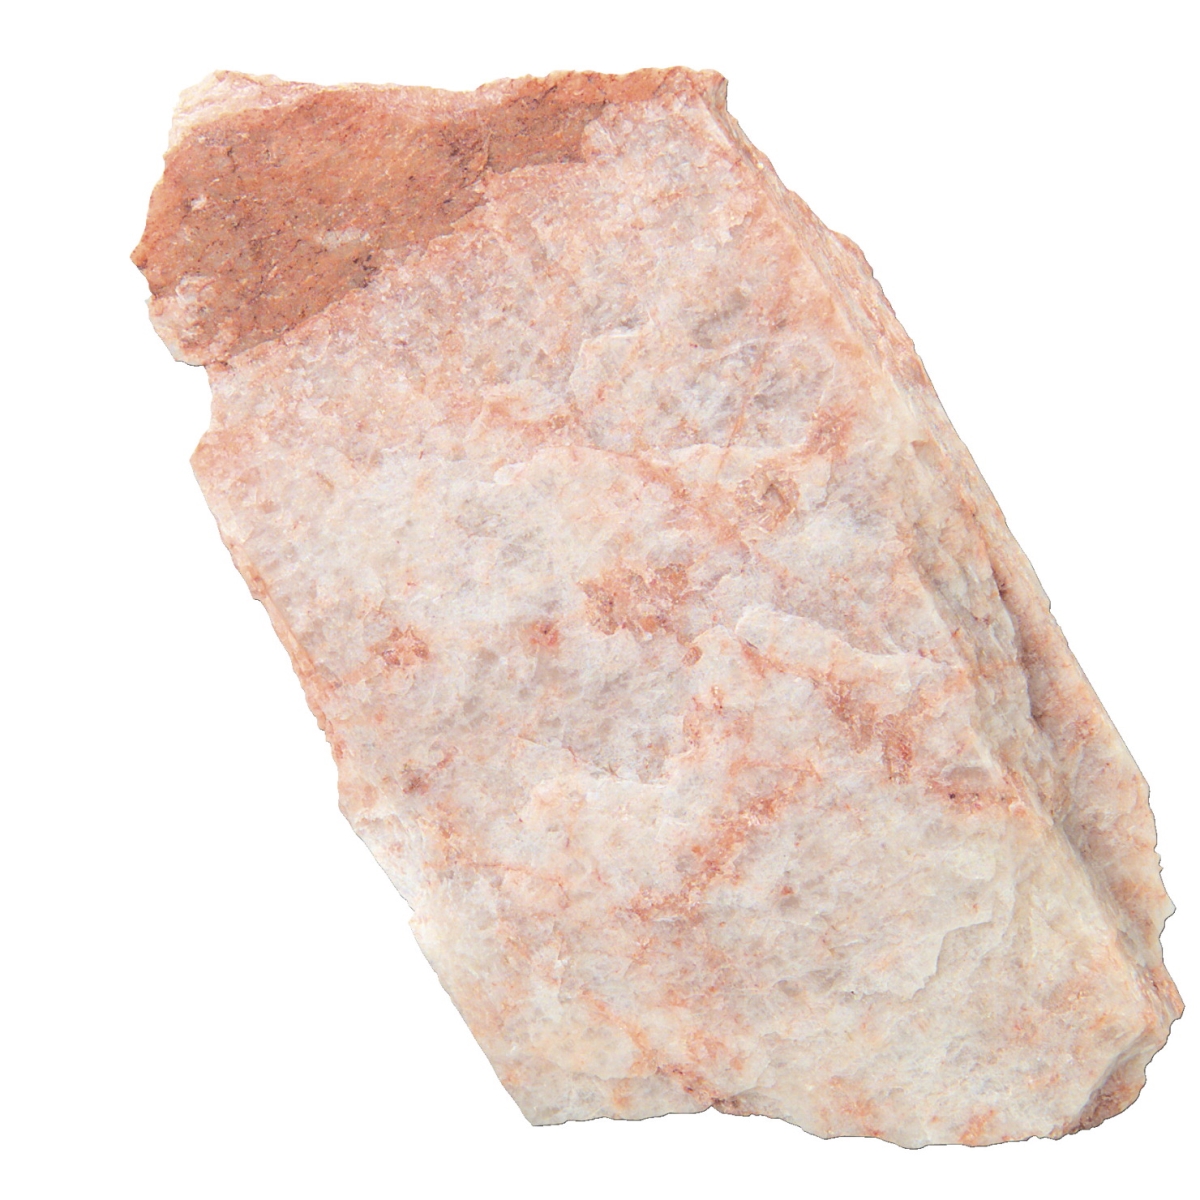 587209 Scott Resources Student Pink Microcline Feldspar Cleavages - Pack Of 10